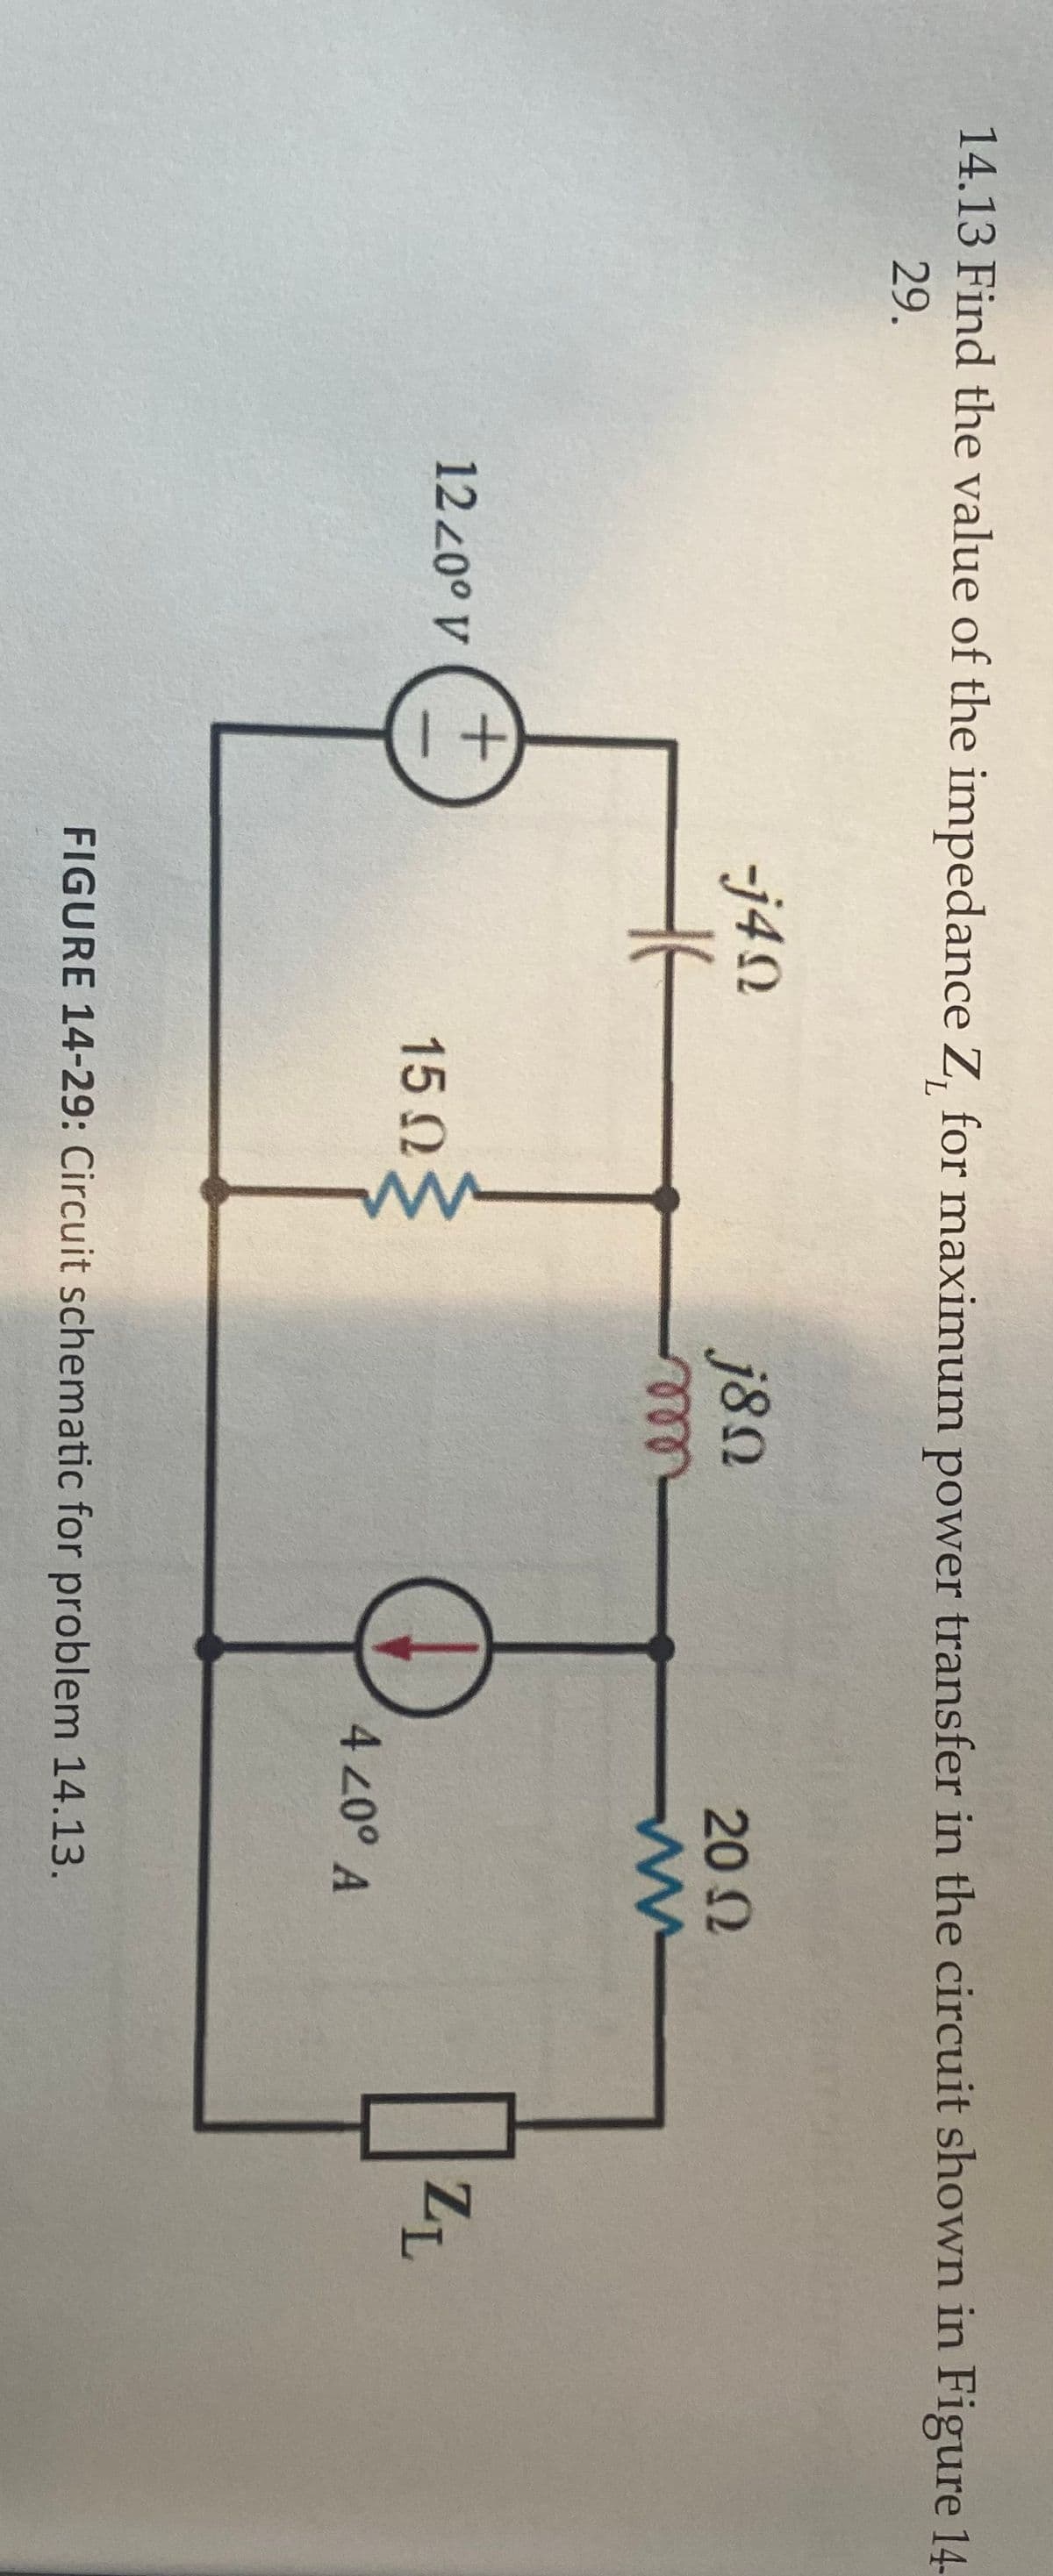 14.13 Find the value of the impedance Z, for maximum power transfer in the circuit shown in Figure 14-
29.
-j4N
j8n
20 N
12 20° V
15 2
4 20° A
FIGURE 14-29: Circuit schematic for problem 14.13.
